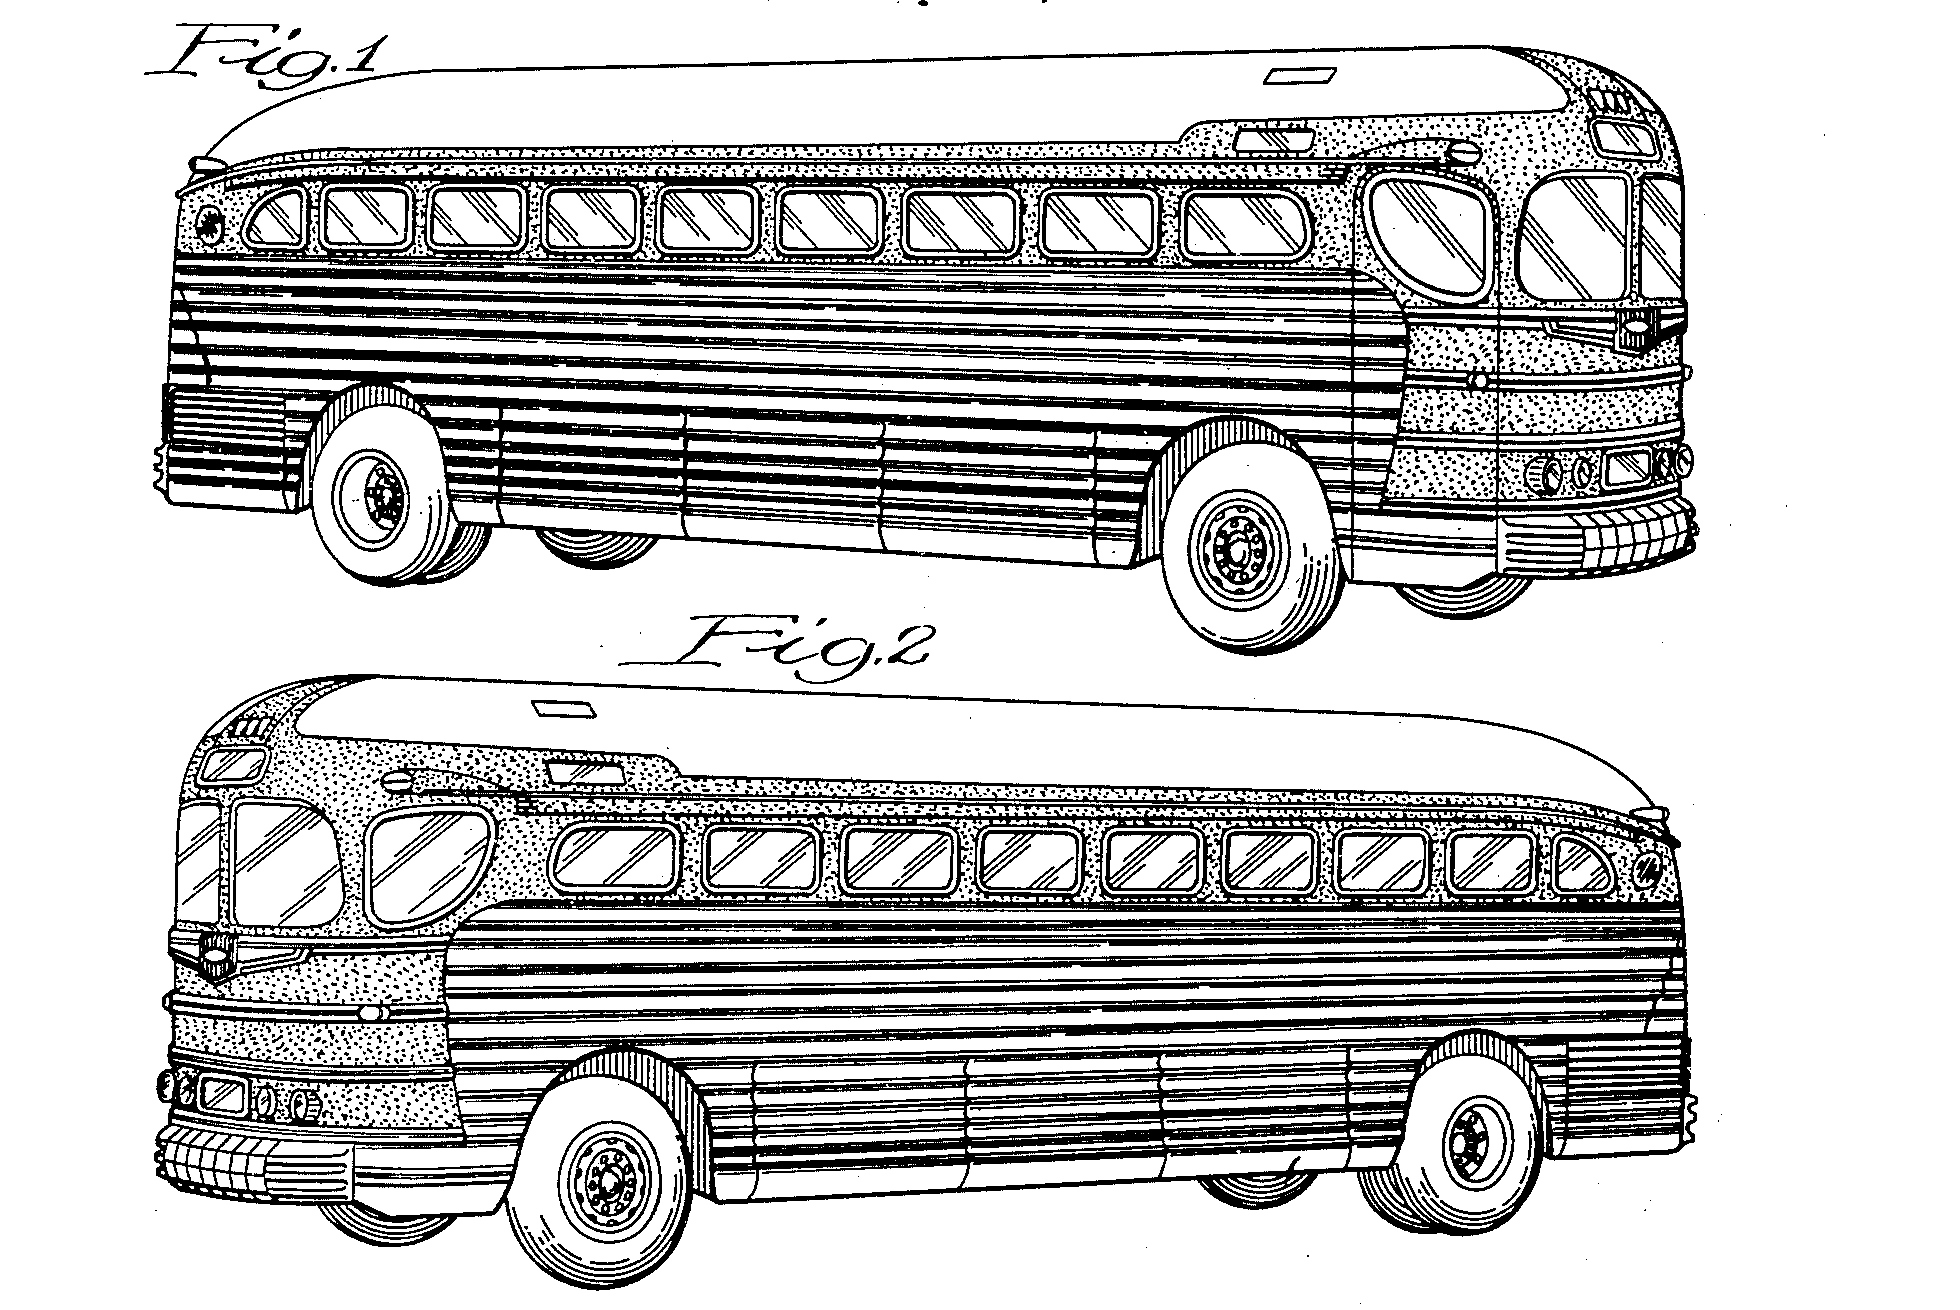 Greyhound Motor Coach, Raymond Lowey, for Greyhound Corporation, 1940/1941. Patent Number: USD 127,174, U.S. Patent Office - from Patented